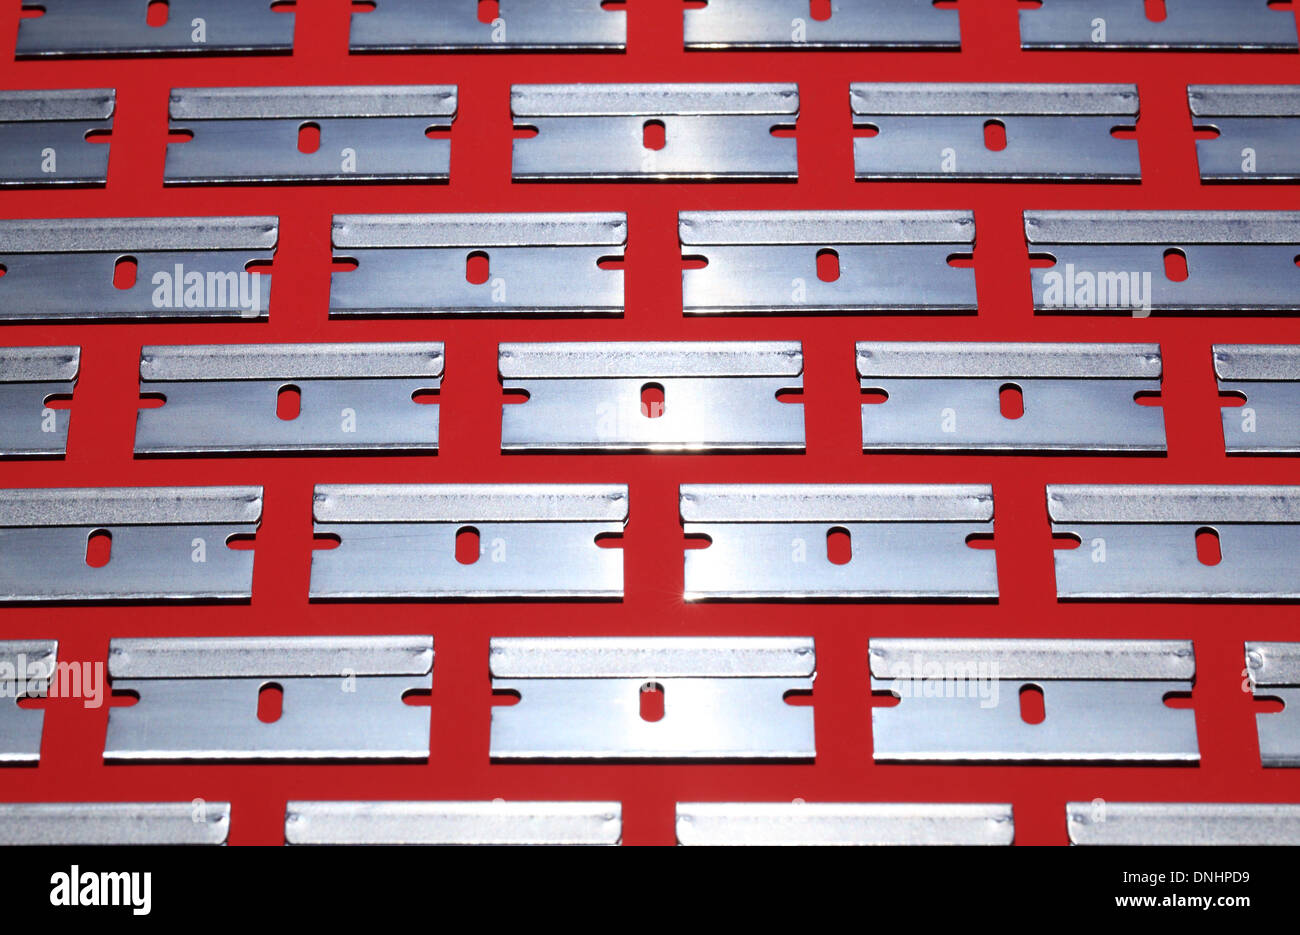 A pattern of many metal razor blades on a red background. Stock Photo